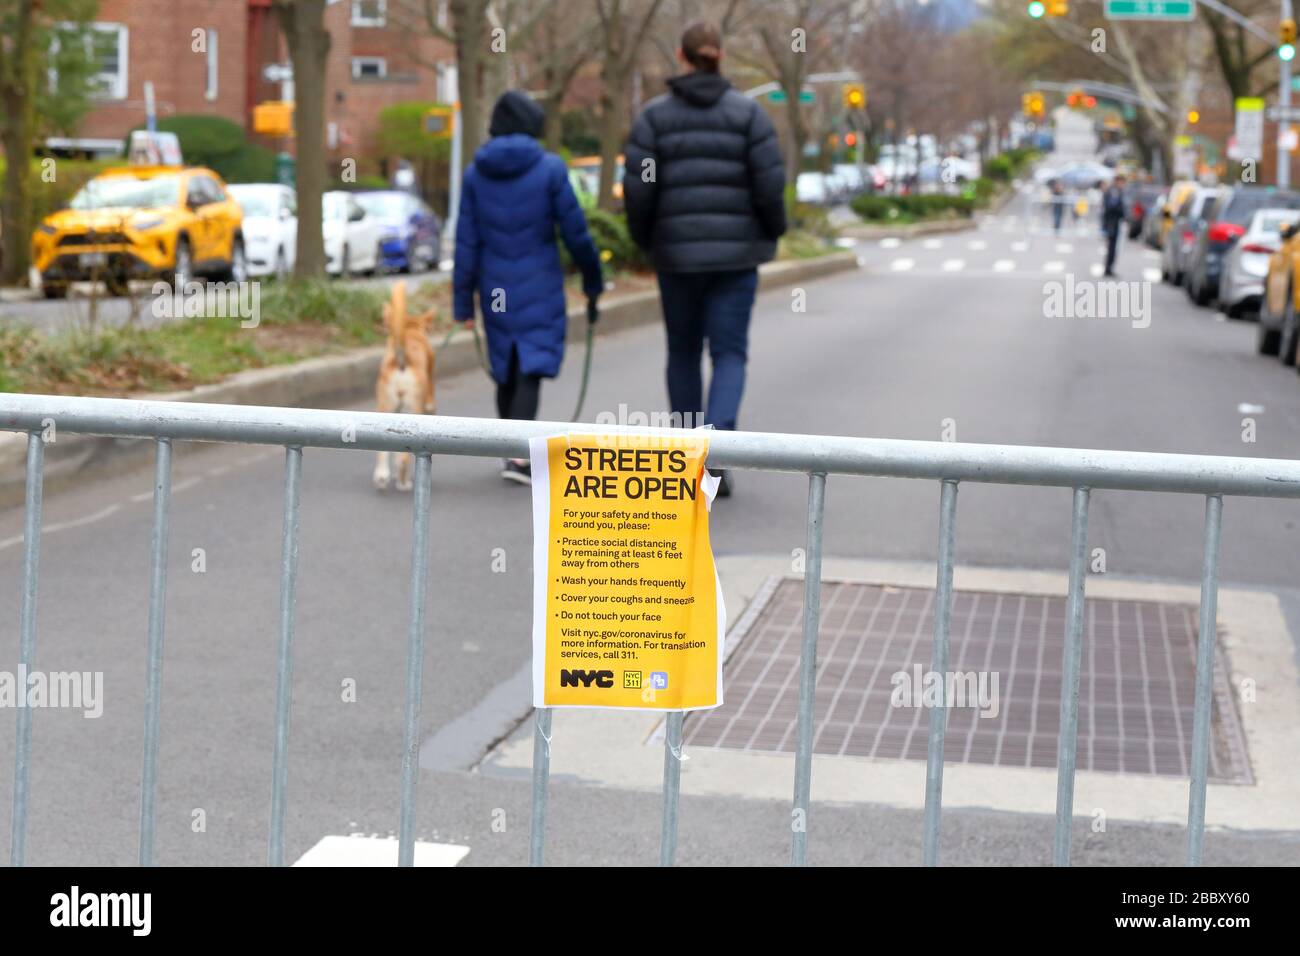 New York, NY, 31st March 2020. A couple and dog walk down a street closed to vehicular traffic in Jackson Heights... SEE MORE INFO FOR FULL CAPTION Stock Photo